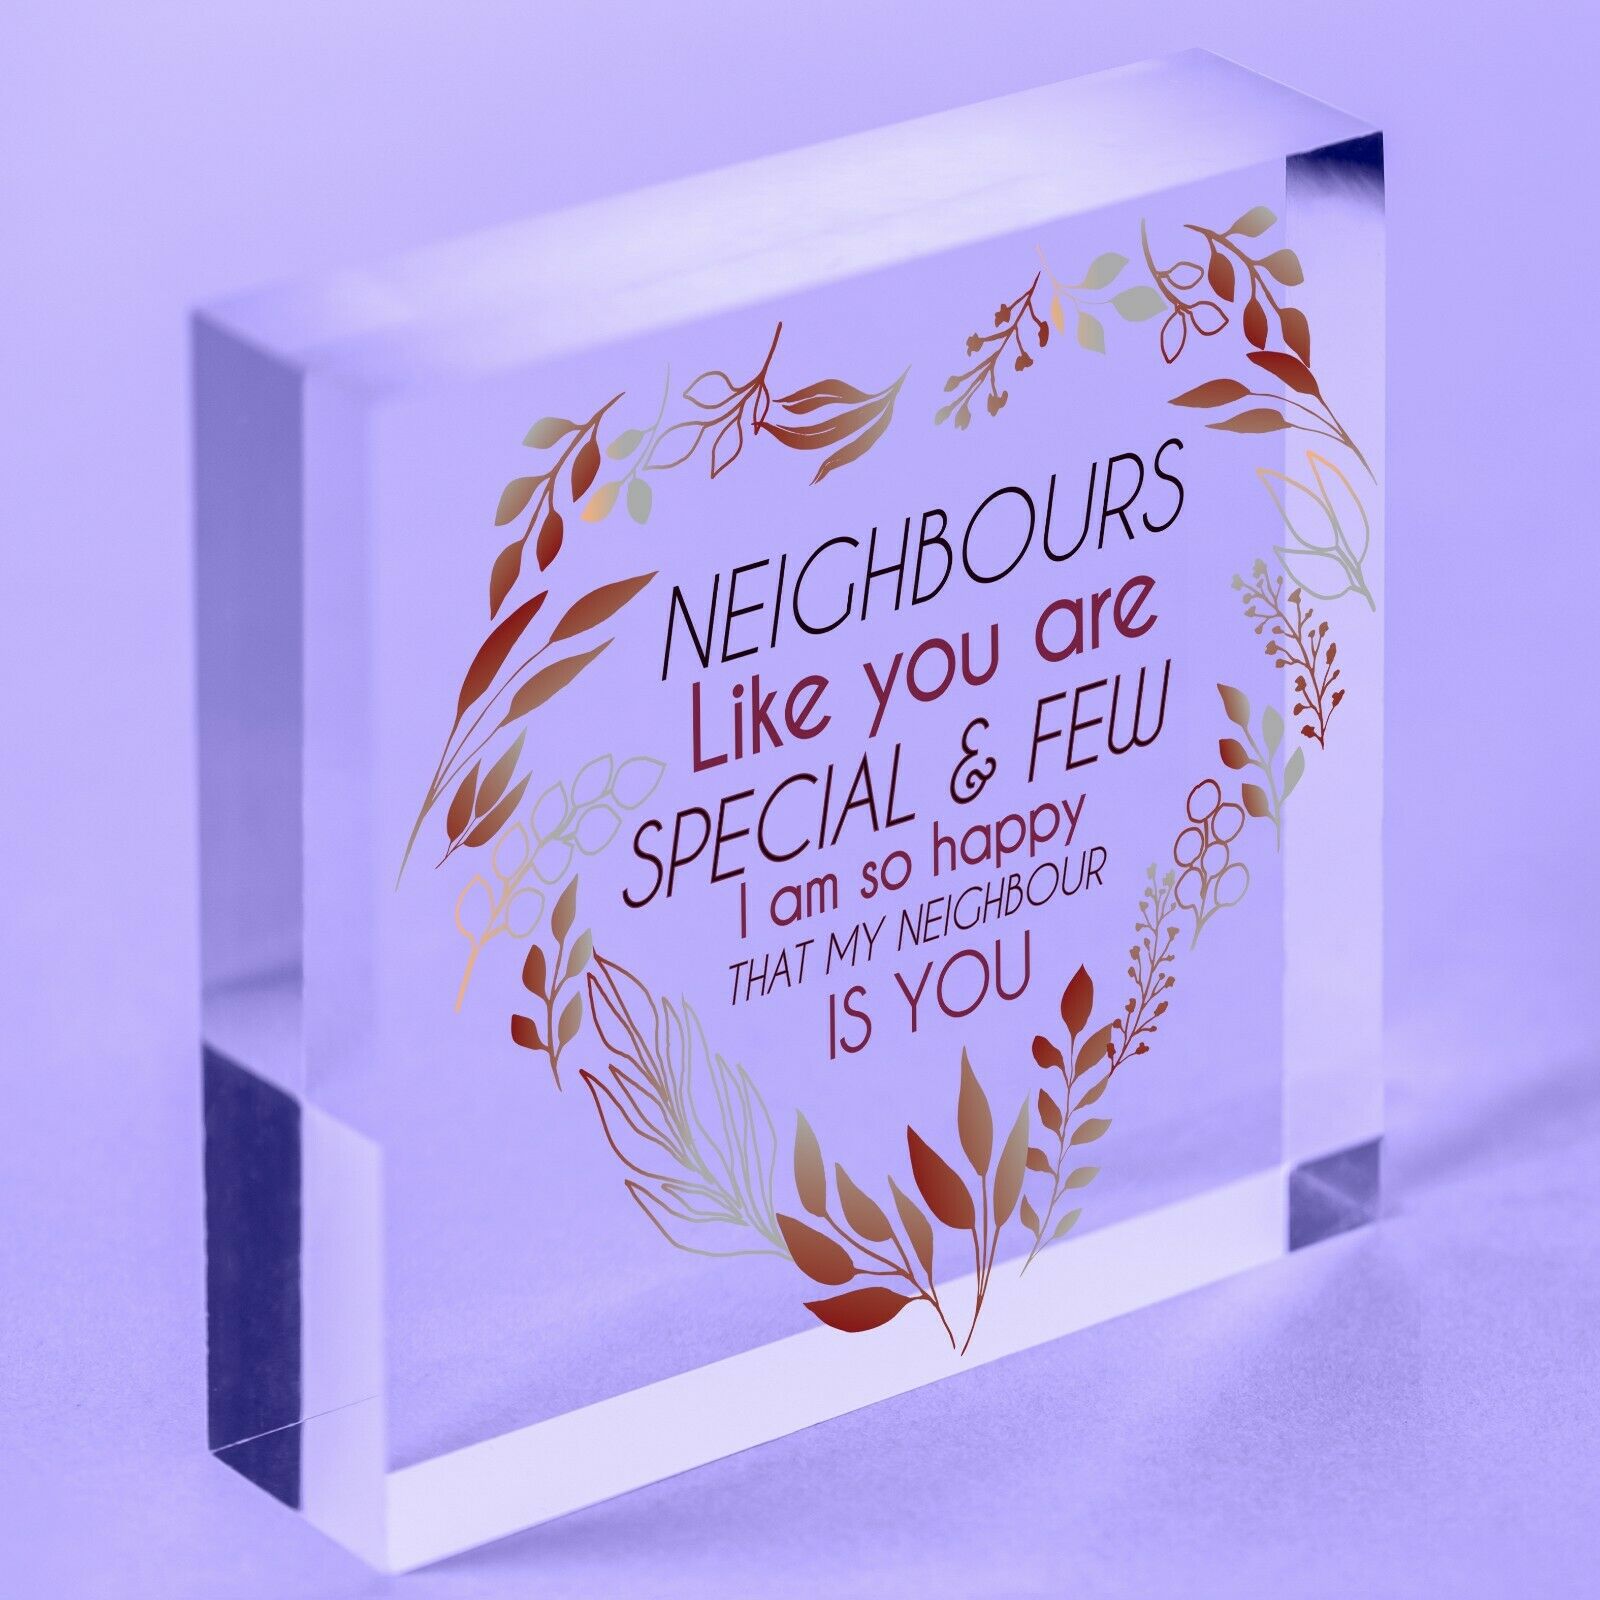 Thank You Neighbour Gift Acrylic Heart Plaque Friendship Friend Home Gift Sign